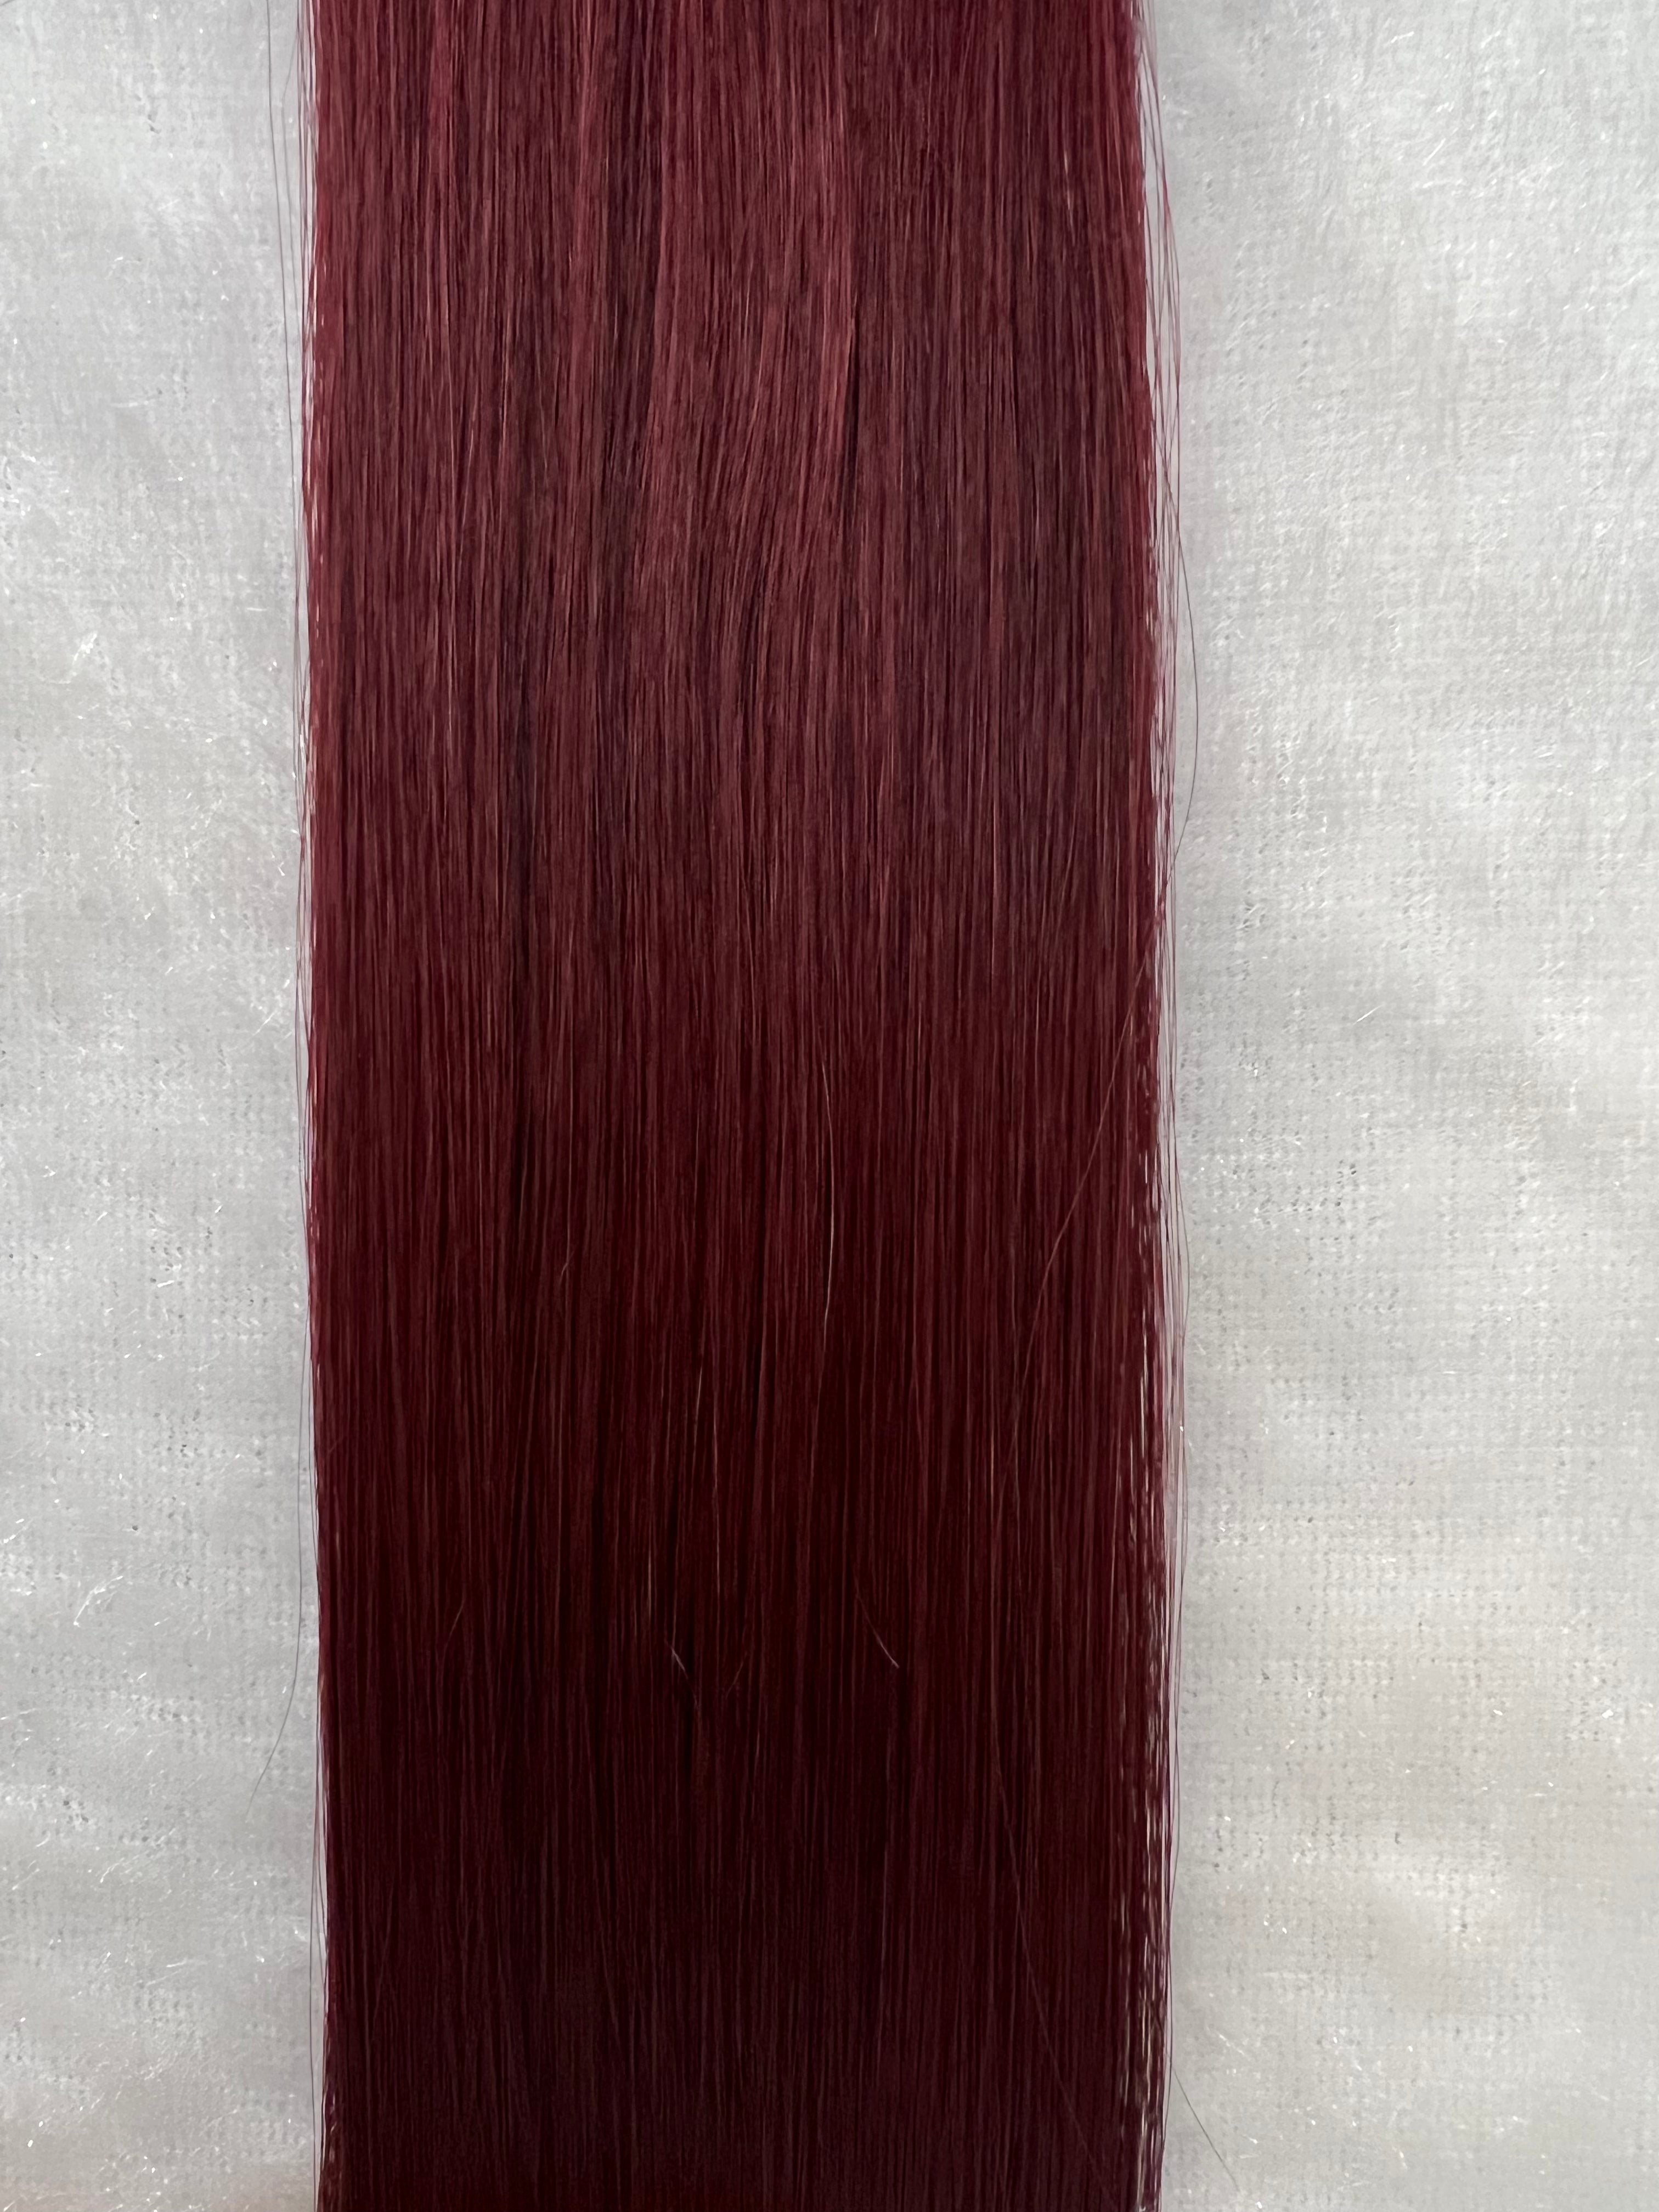 C#99j- EXTENSIONS EUROGOLD TRAME/WEFT